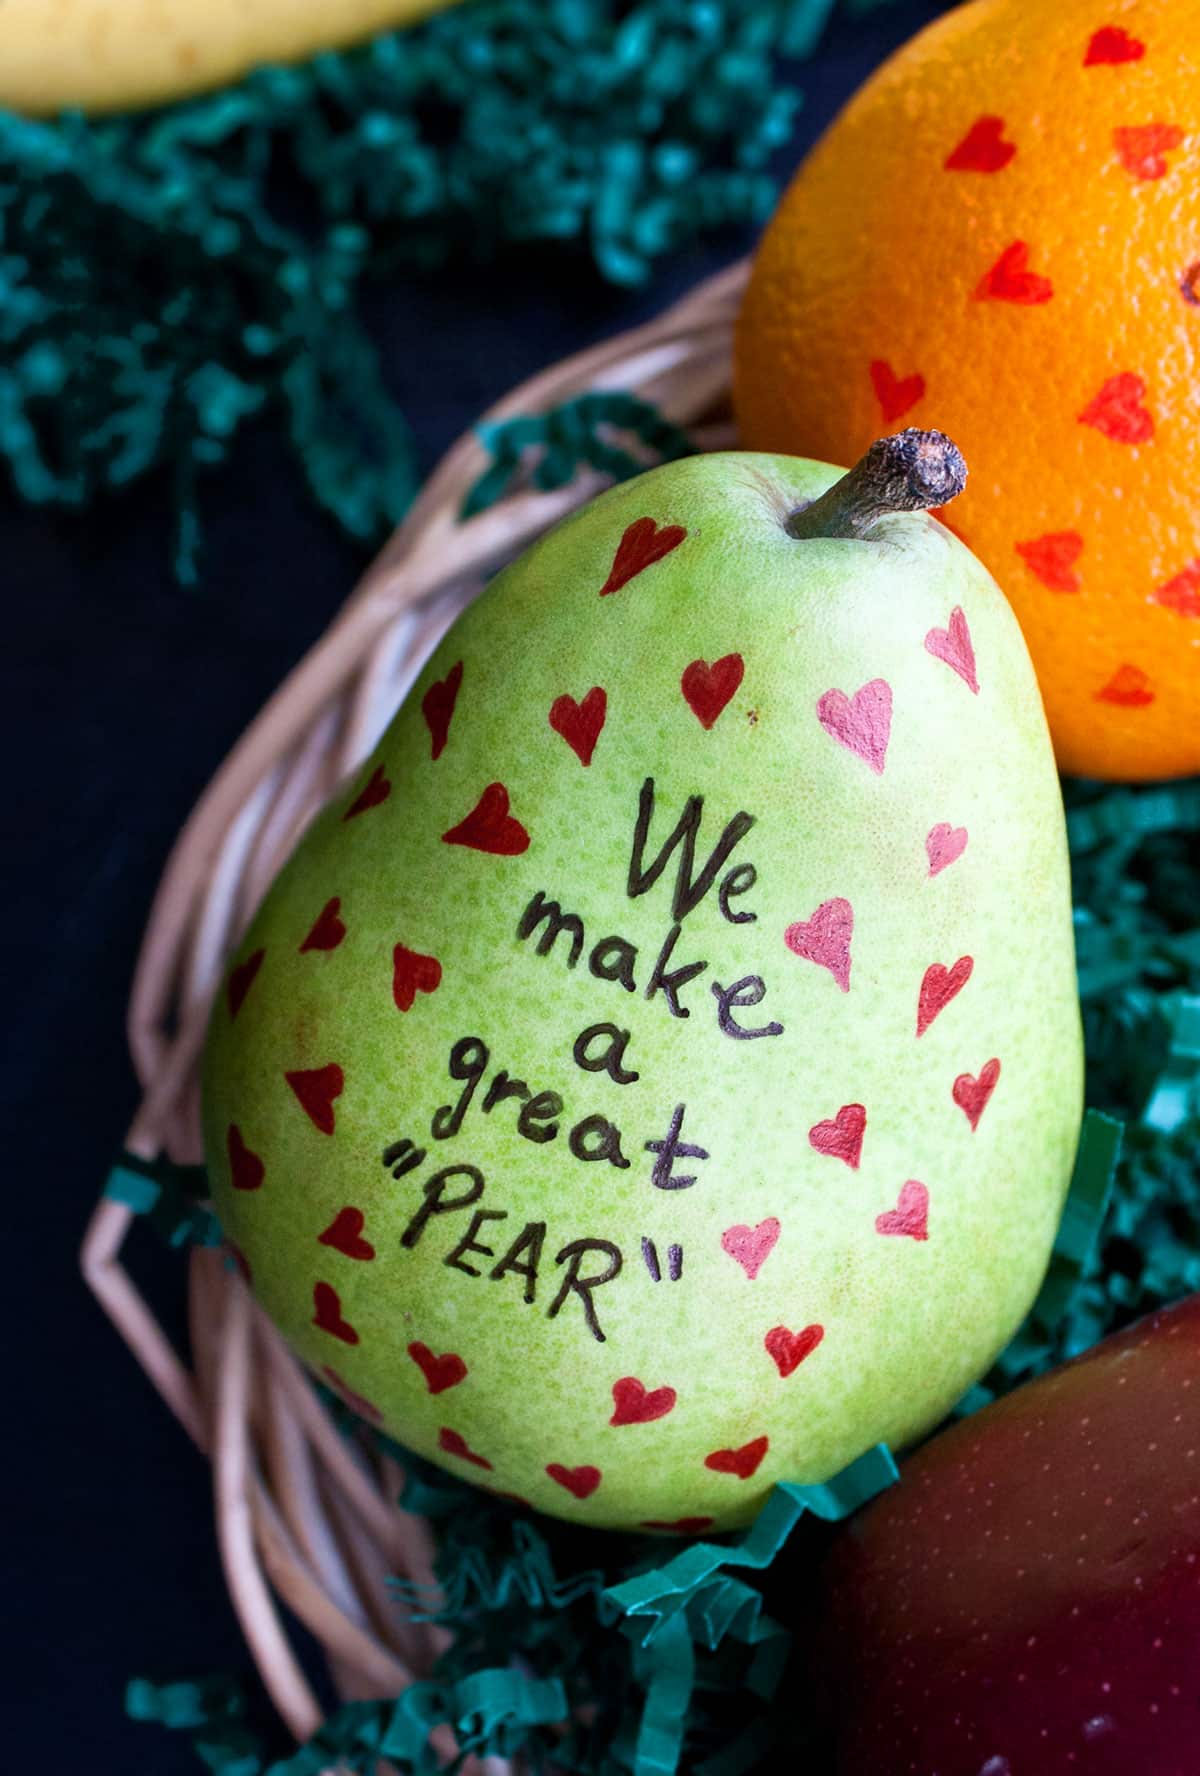 Valentine's Day Pears With A Cute Note: "We Make A Great Pear."